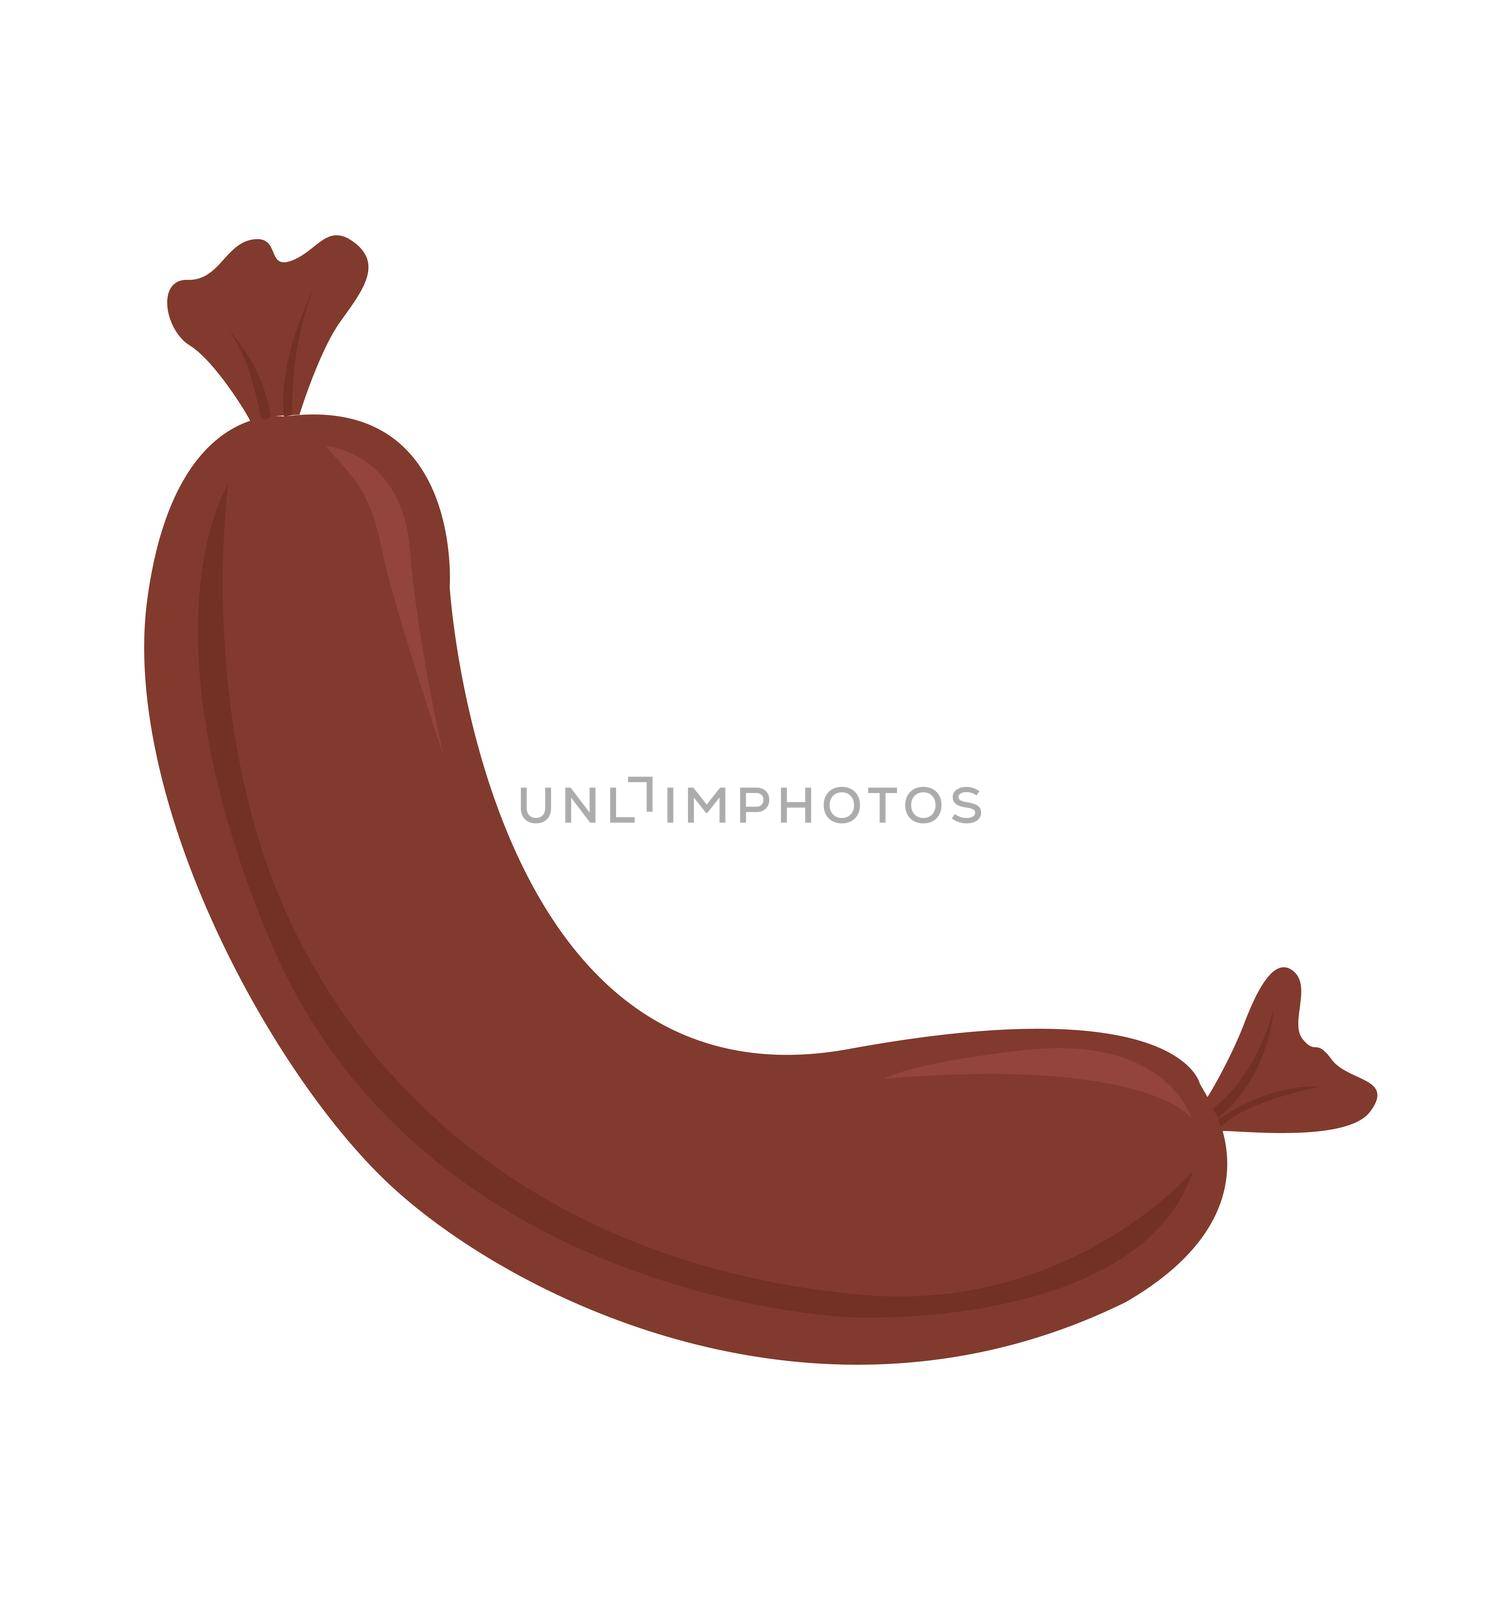 sausage icon vector illustration isolated on white